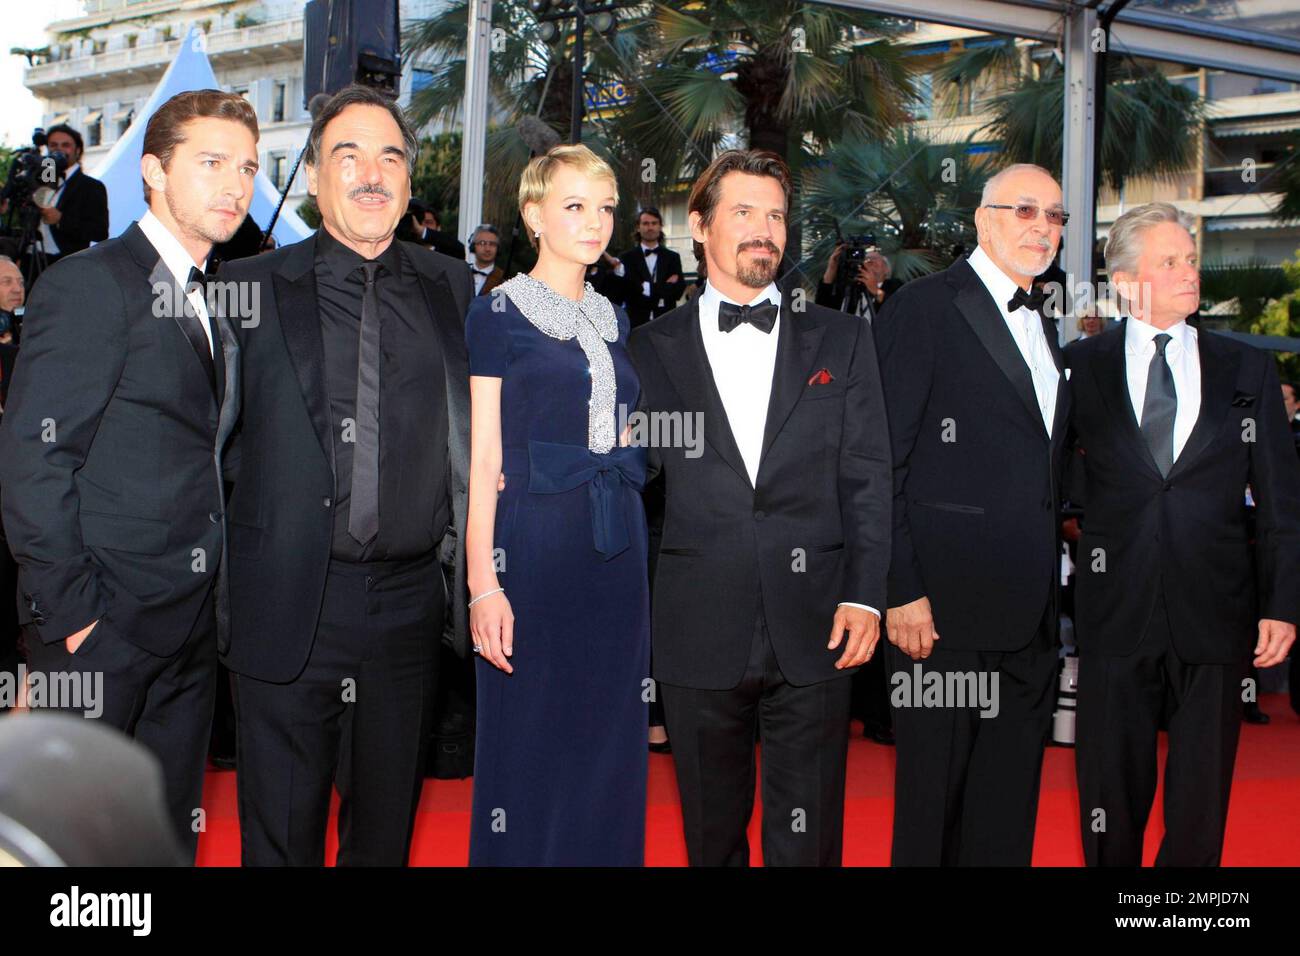 (L-R) Shia LaBeouf, Oliver Stone, Carey Mulligan, Josh Brolin, Frank Langella and Michael Douglas at the 63rd annual Cannes Film Festival premiere of 'Wall Street: Money Never Sleeps' in Cannes, France. 5/14/10. Stock Photo